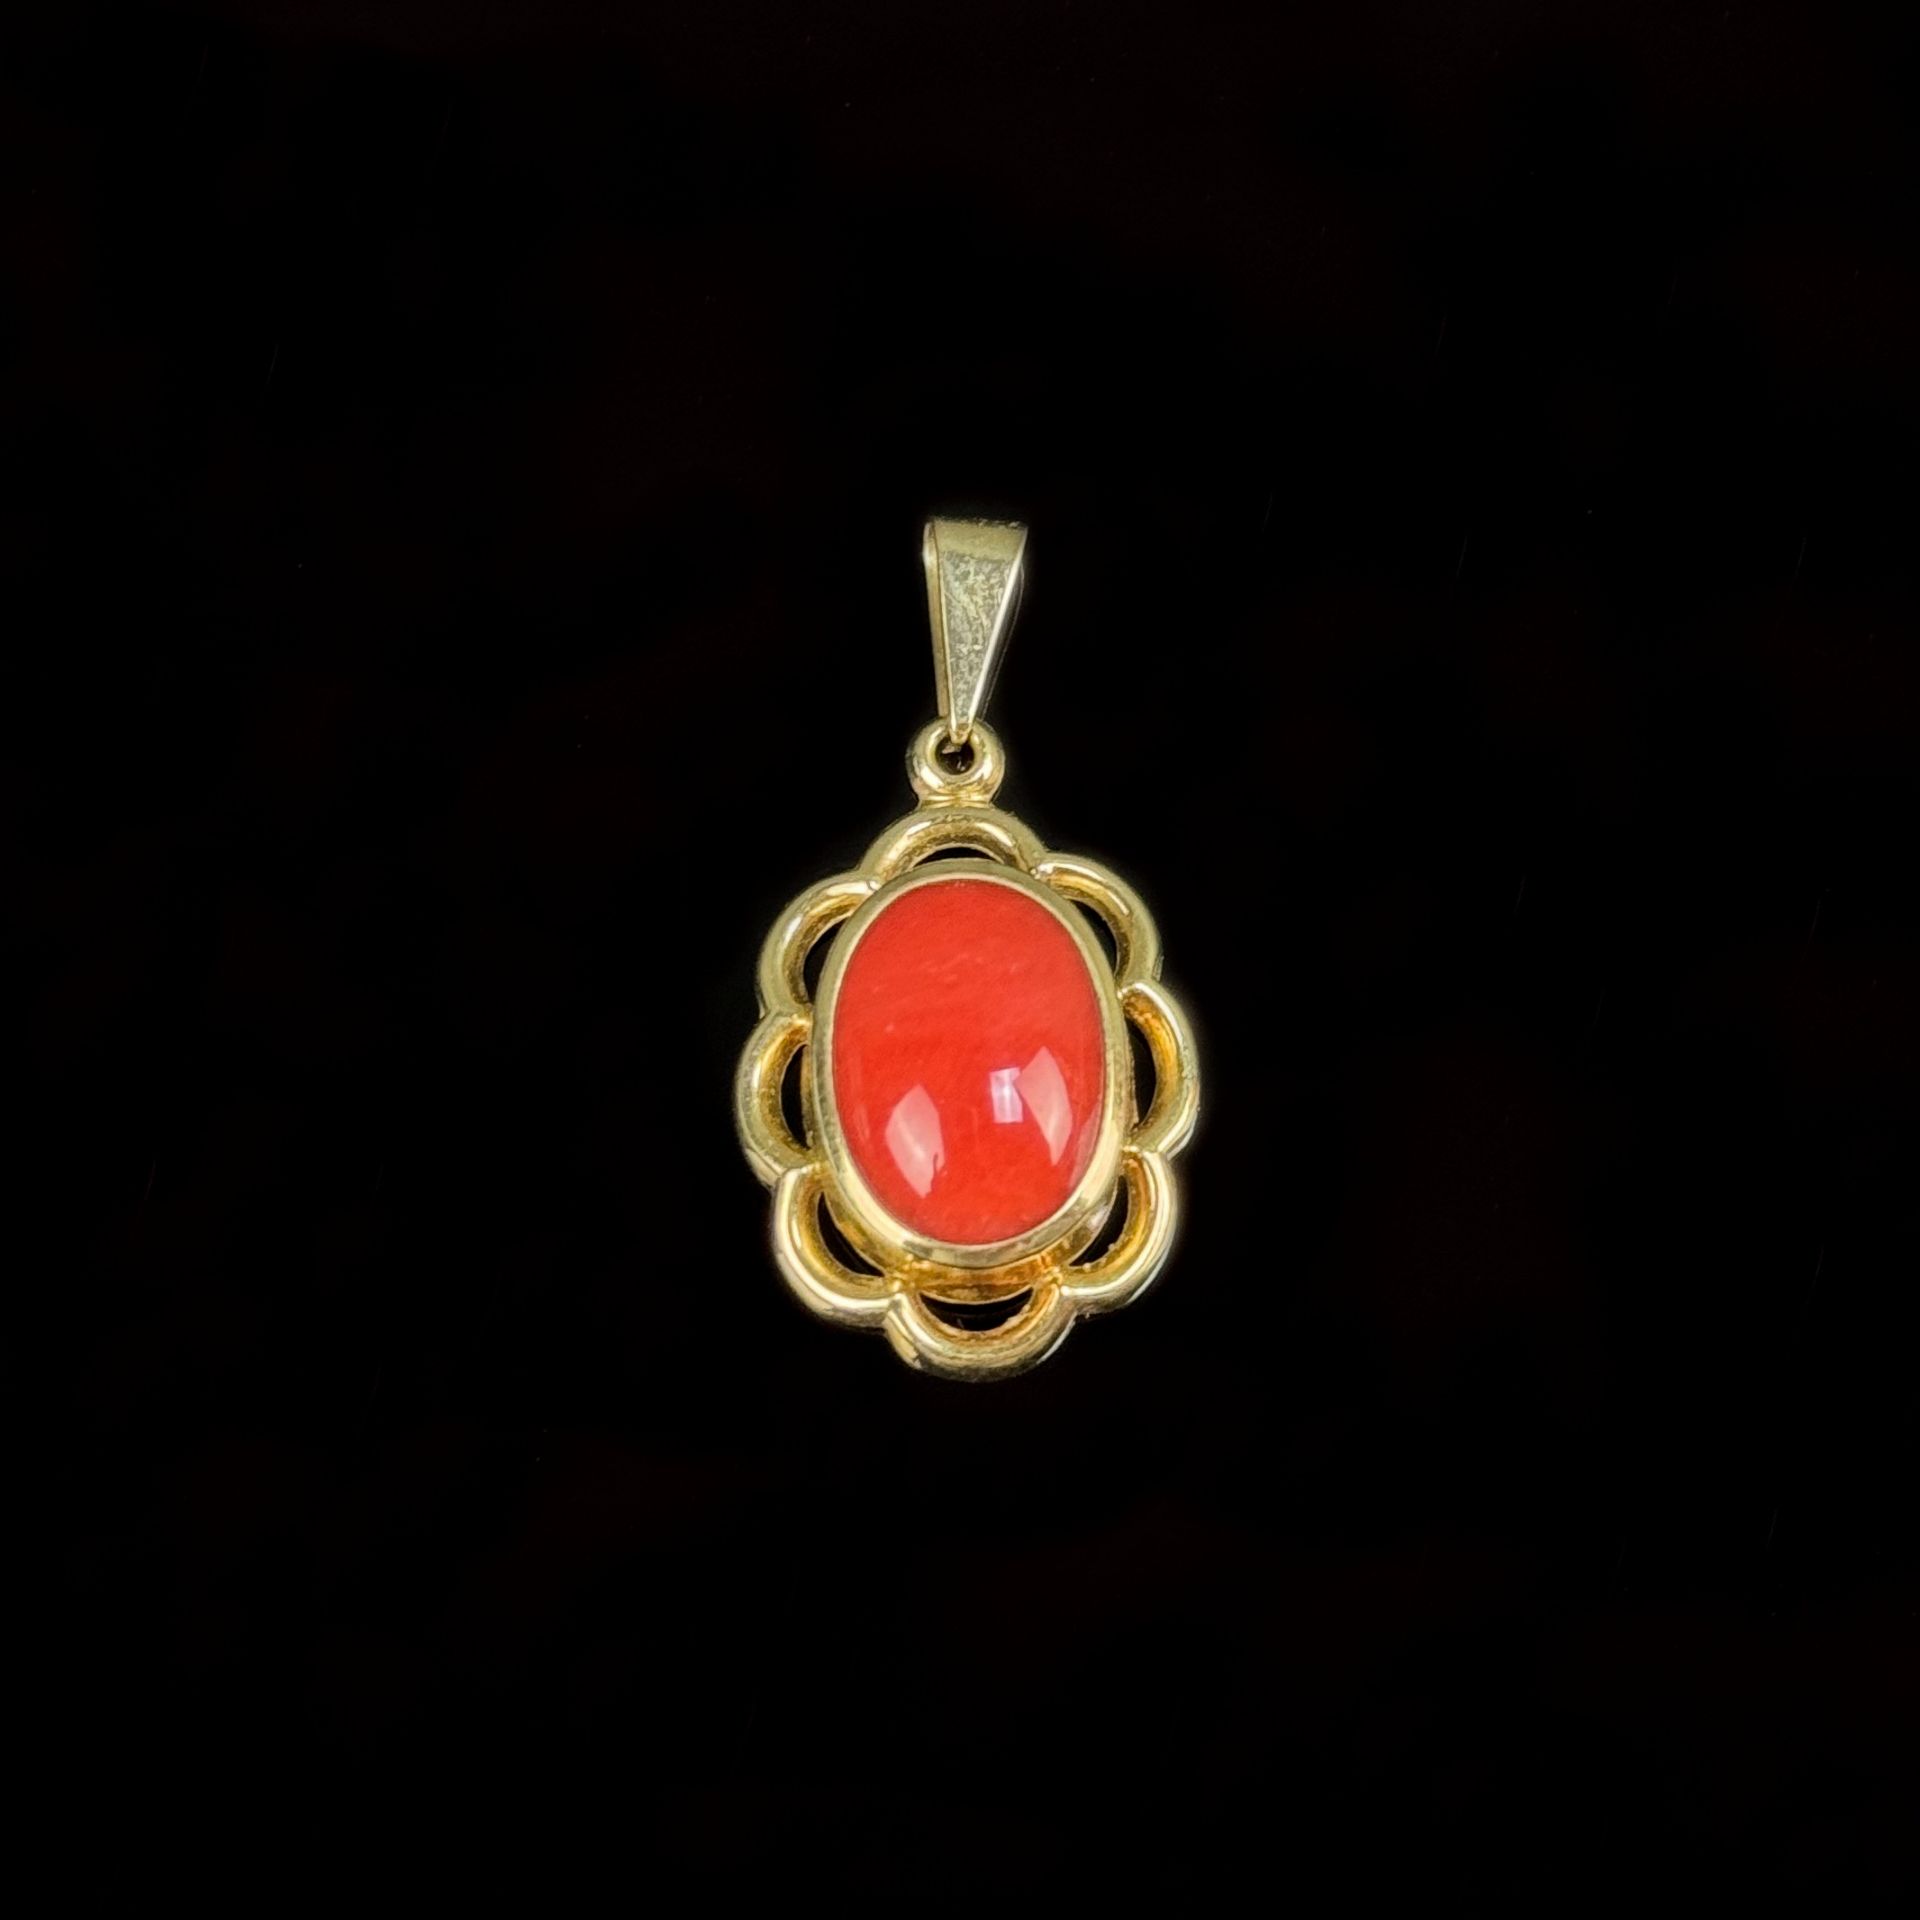 Coral pendant, 333/8K yellow gold (hallmarked), total weight 1.89g, length 3cm